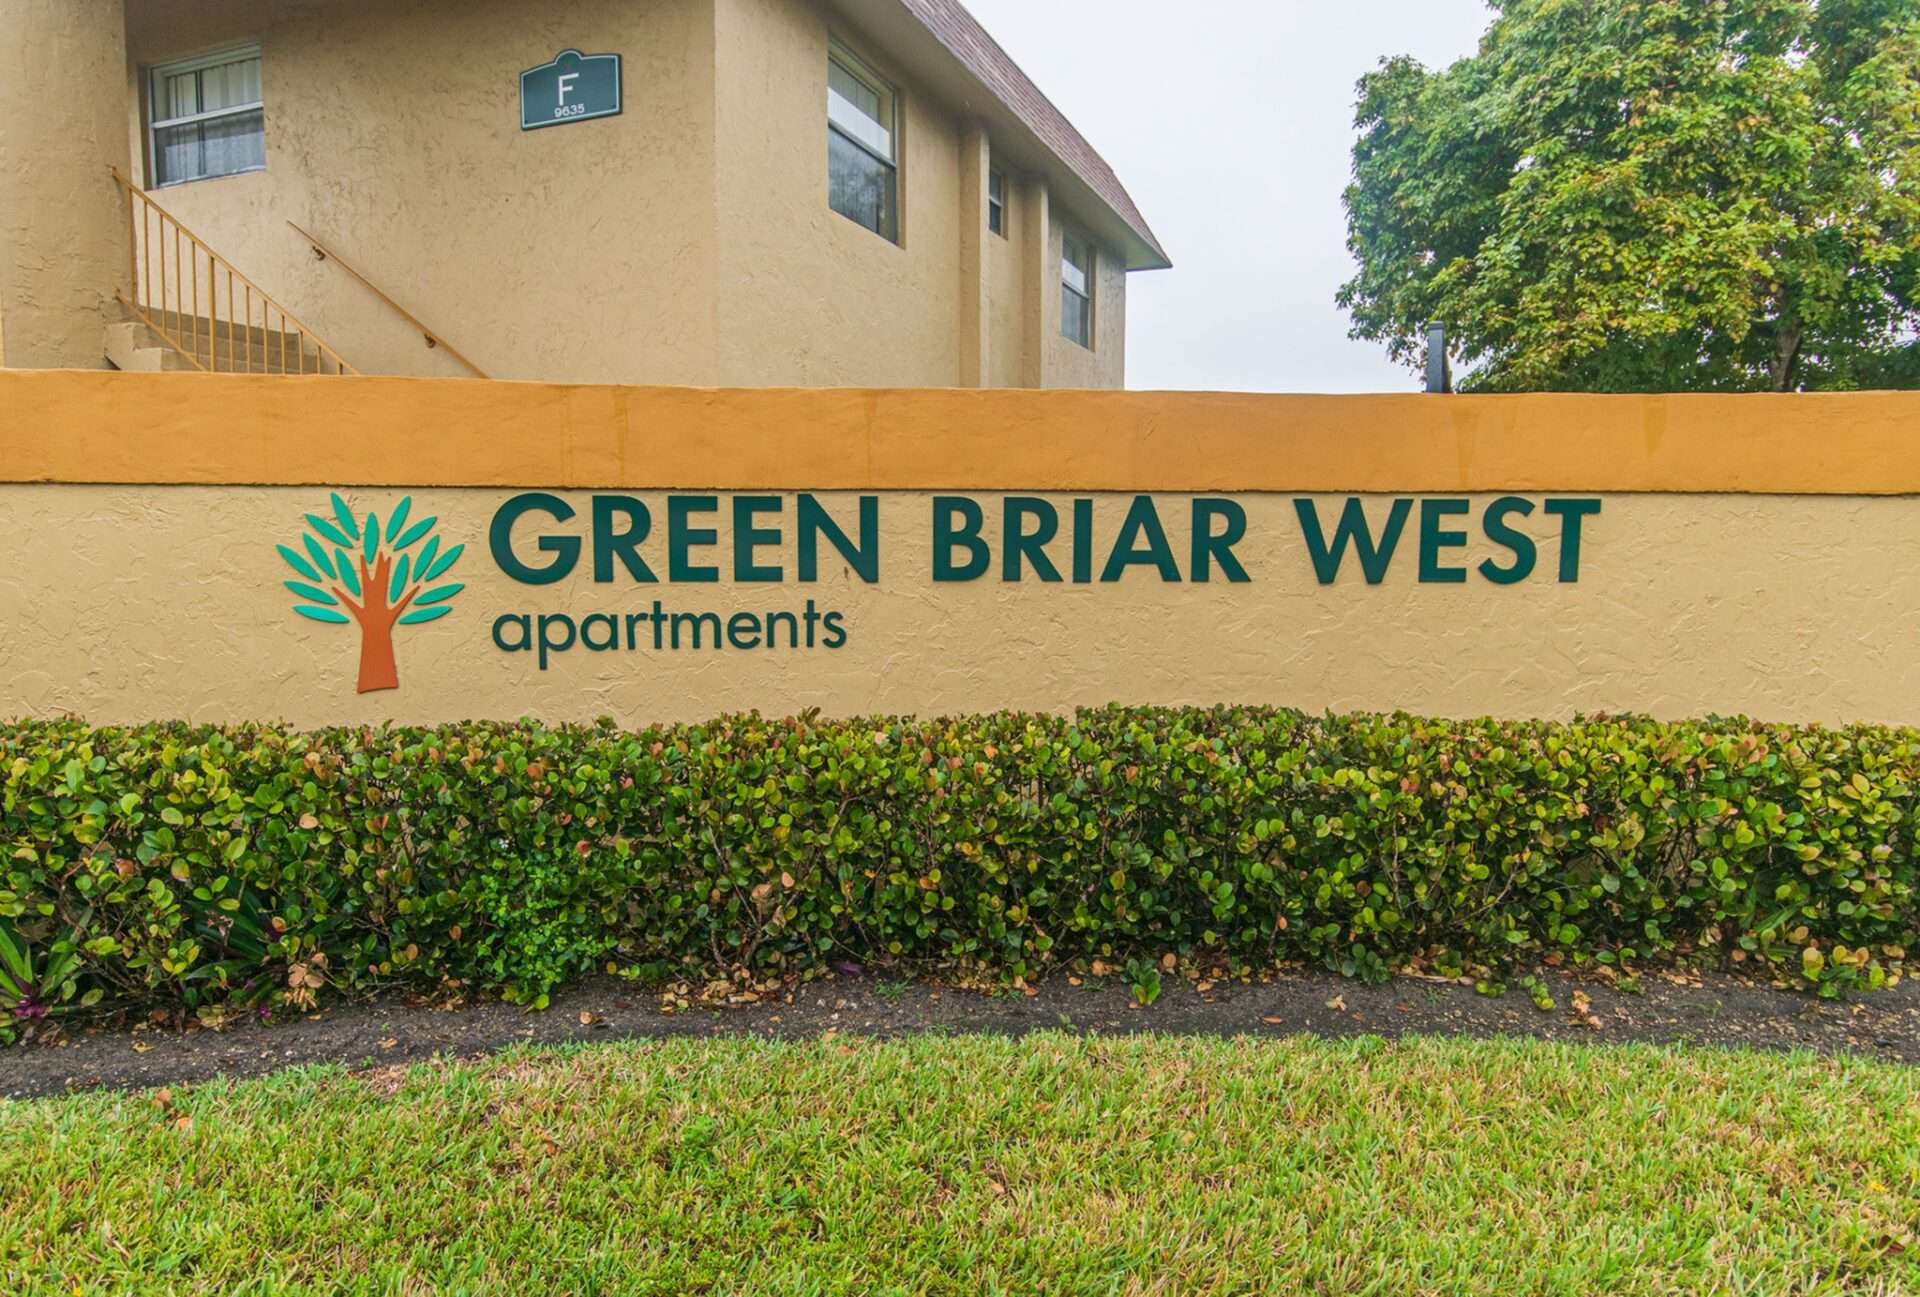 Sign saying "Green Briar West apartments" with landscaped bushes and grass in front of the sign.